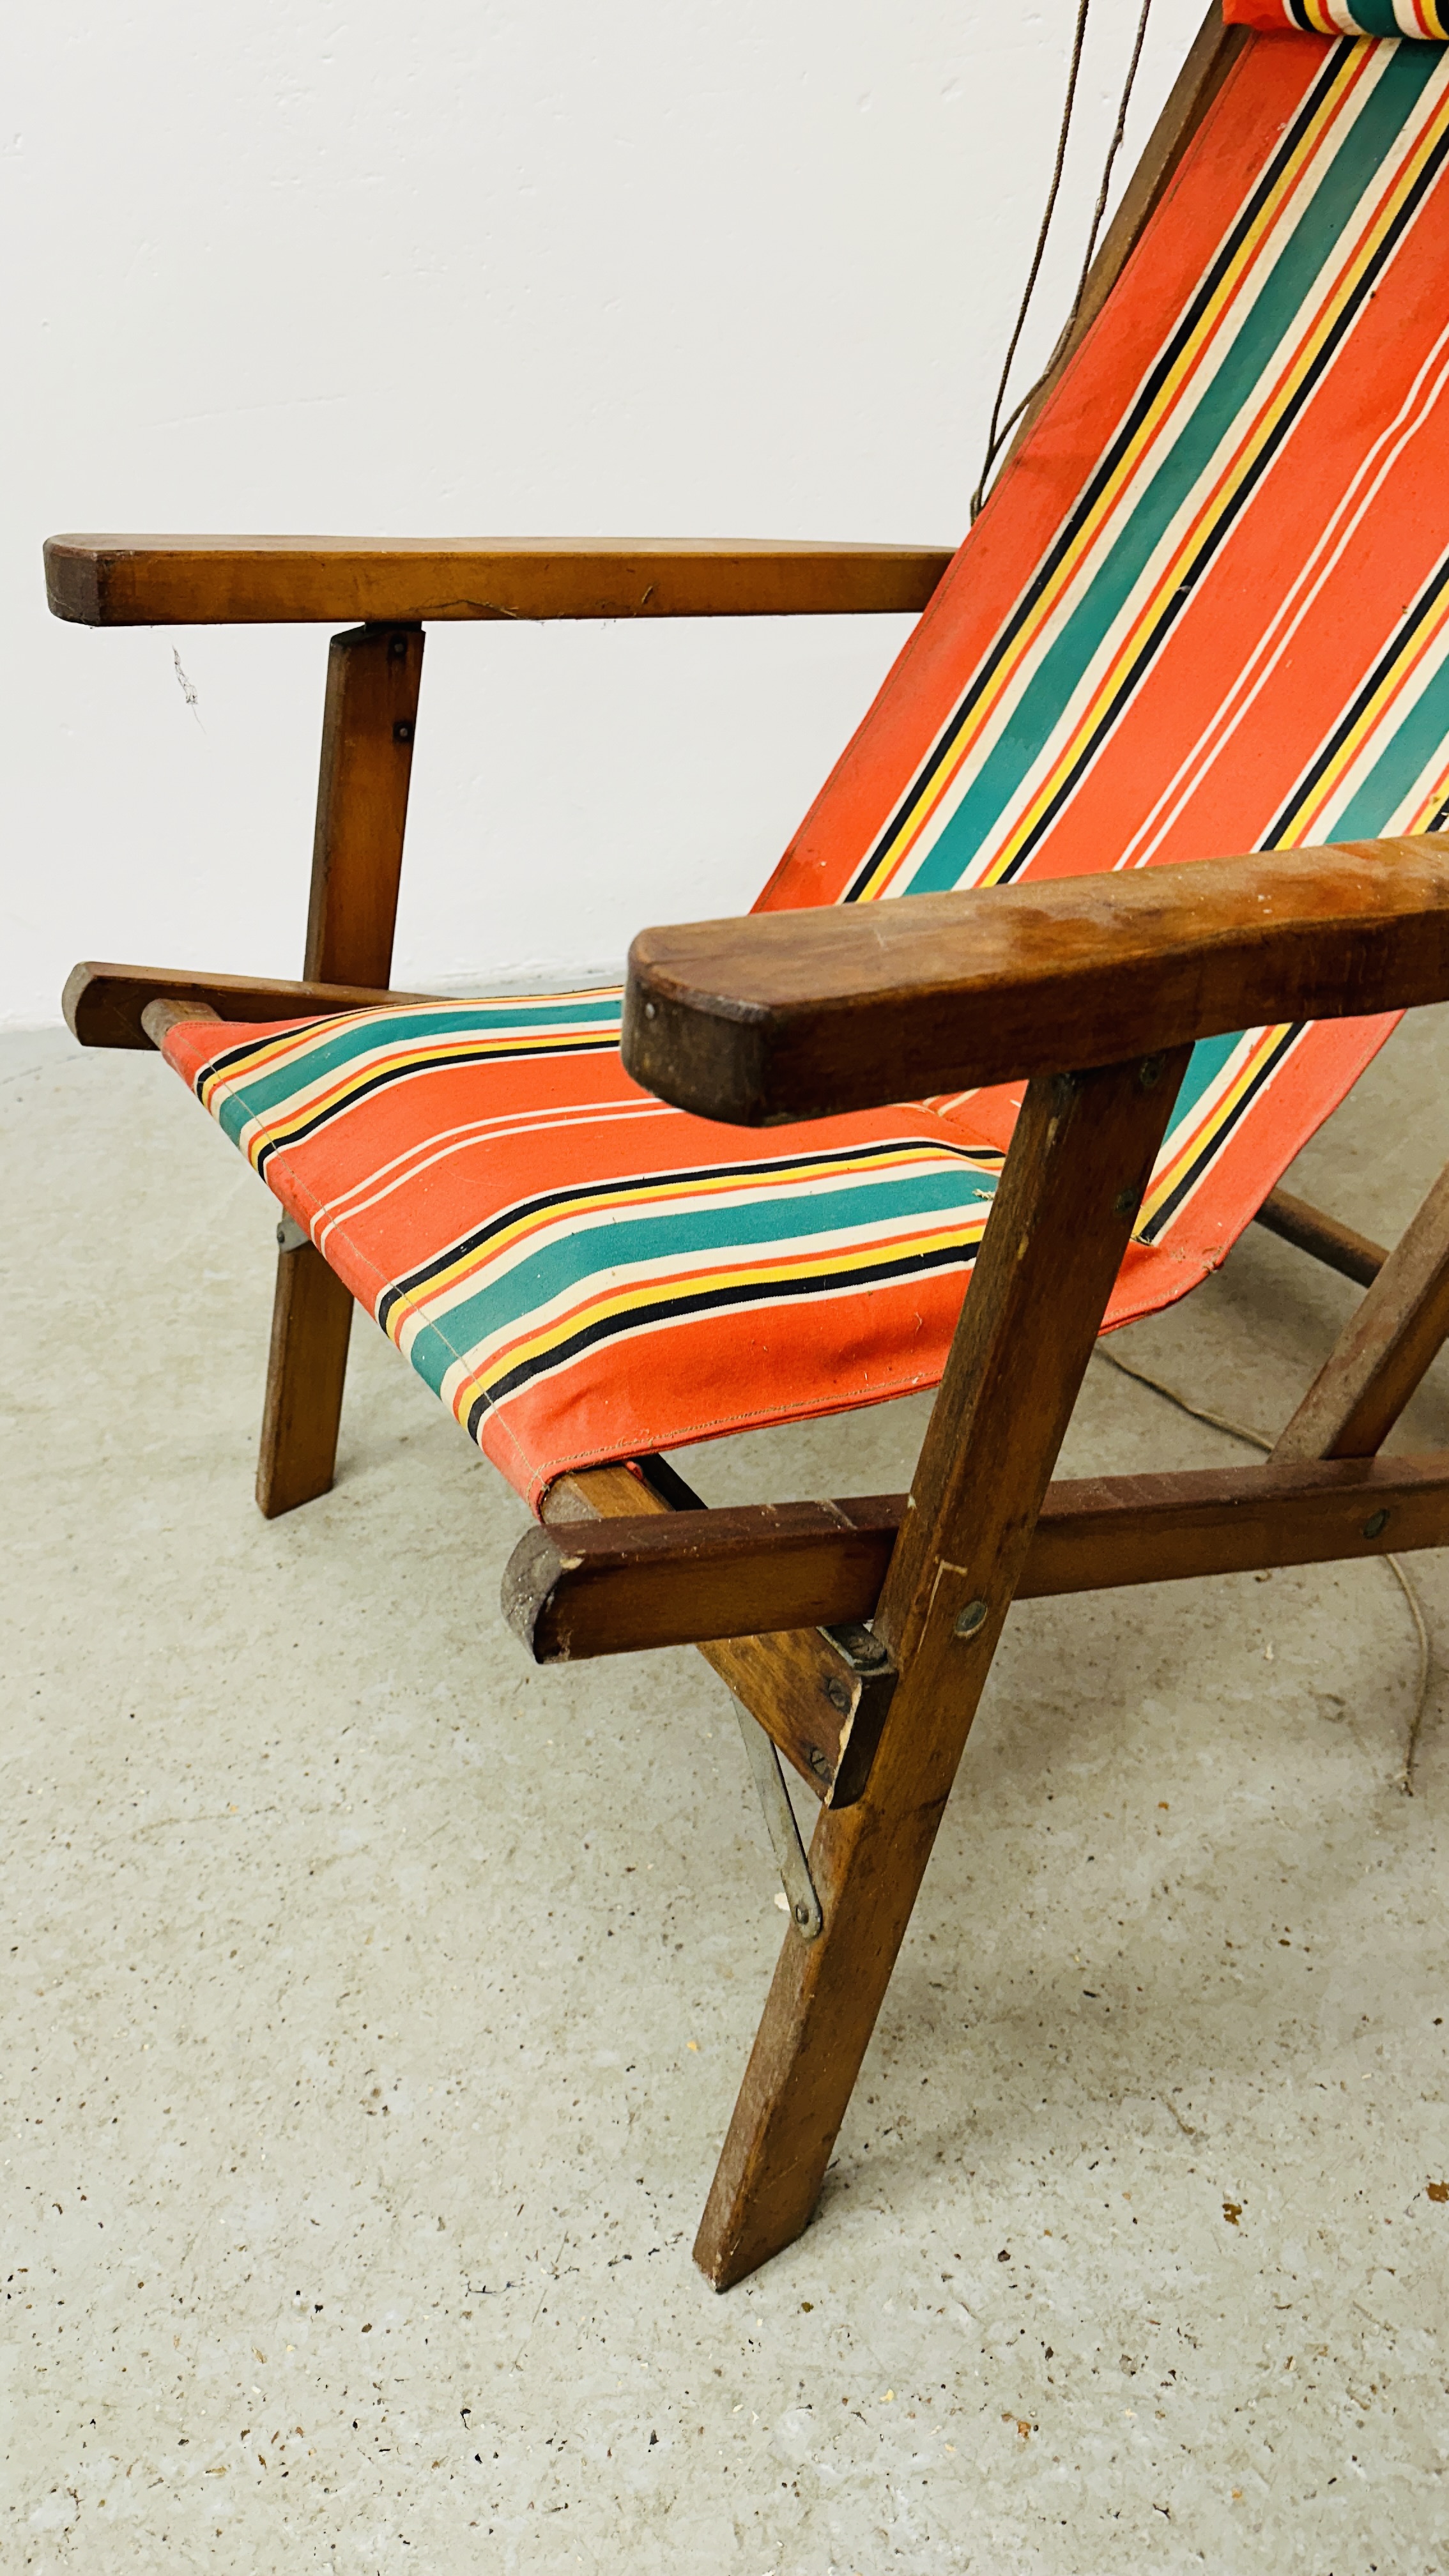 A PAIR OF GEEBRO "THE OCEAN CHAIR" DECK CHAIRS WITH SUN SHADES. - Image 6 of 13